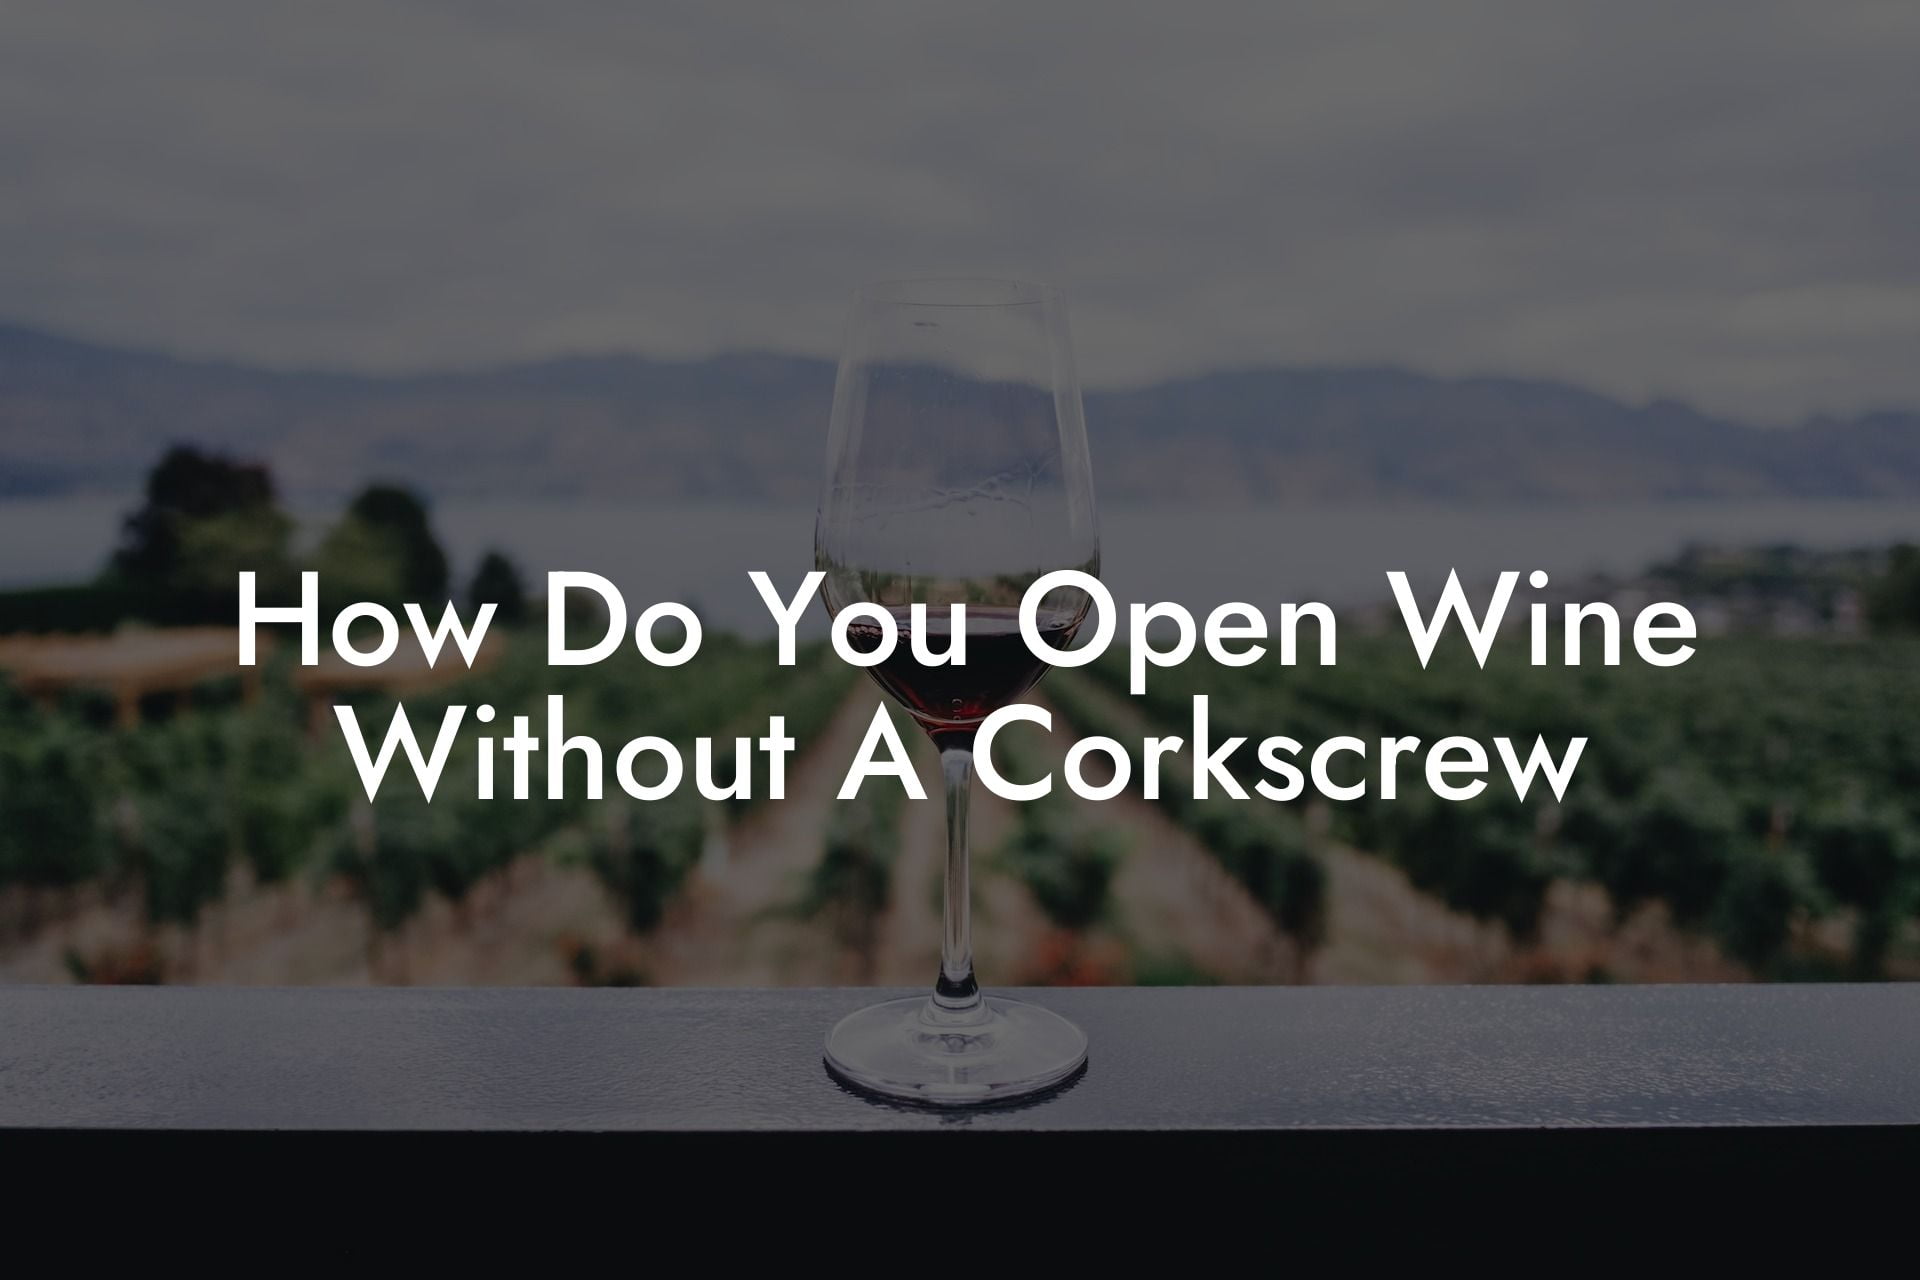 How Do You Open Wine Without A Corkscrew